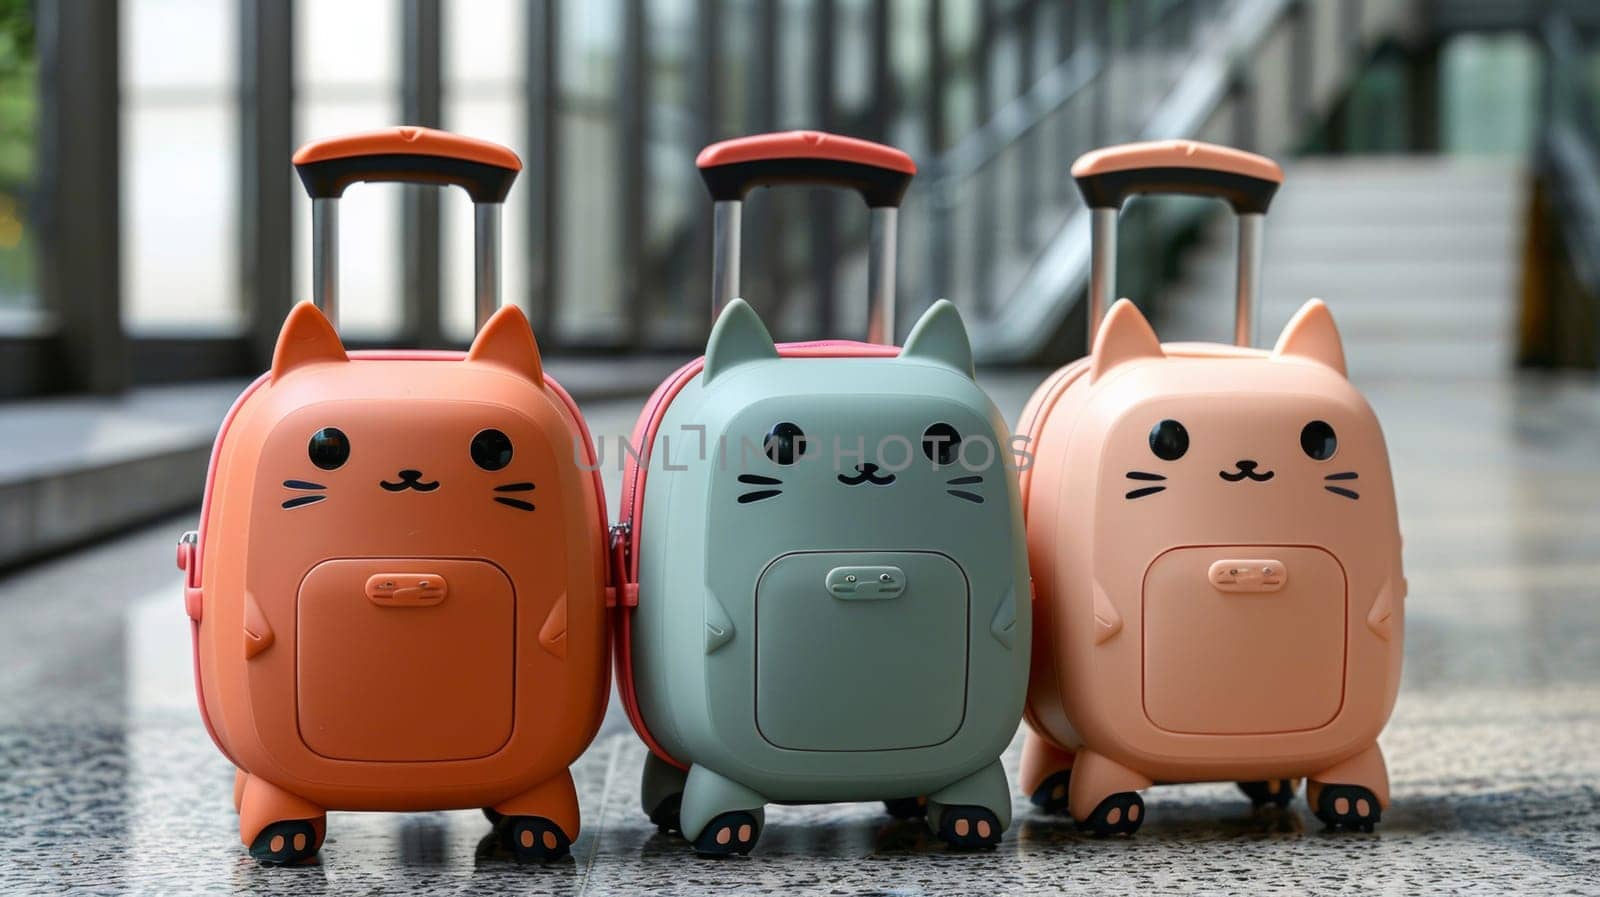 Three colorful luggage pieces with cat faces on them